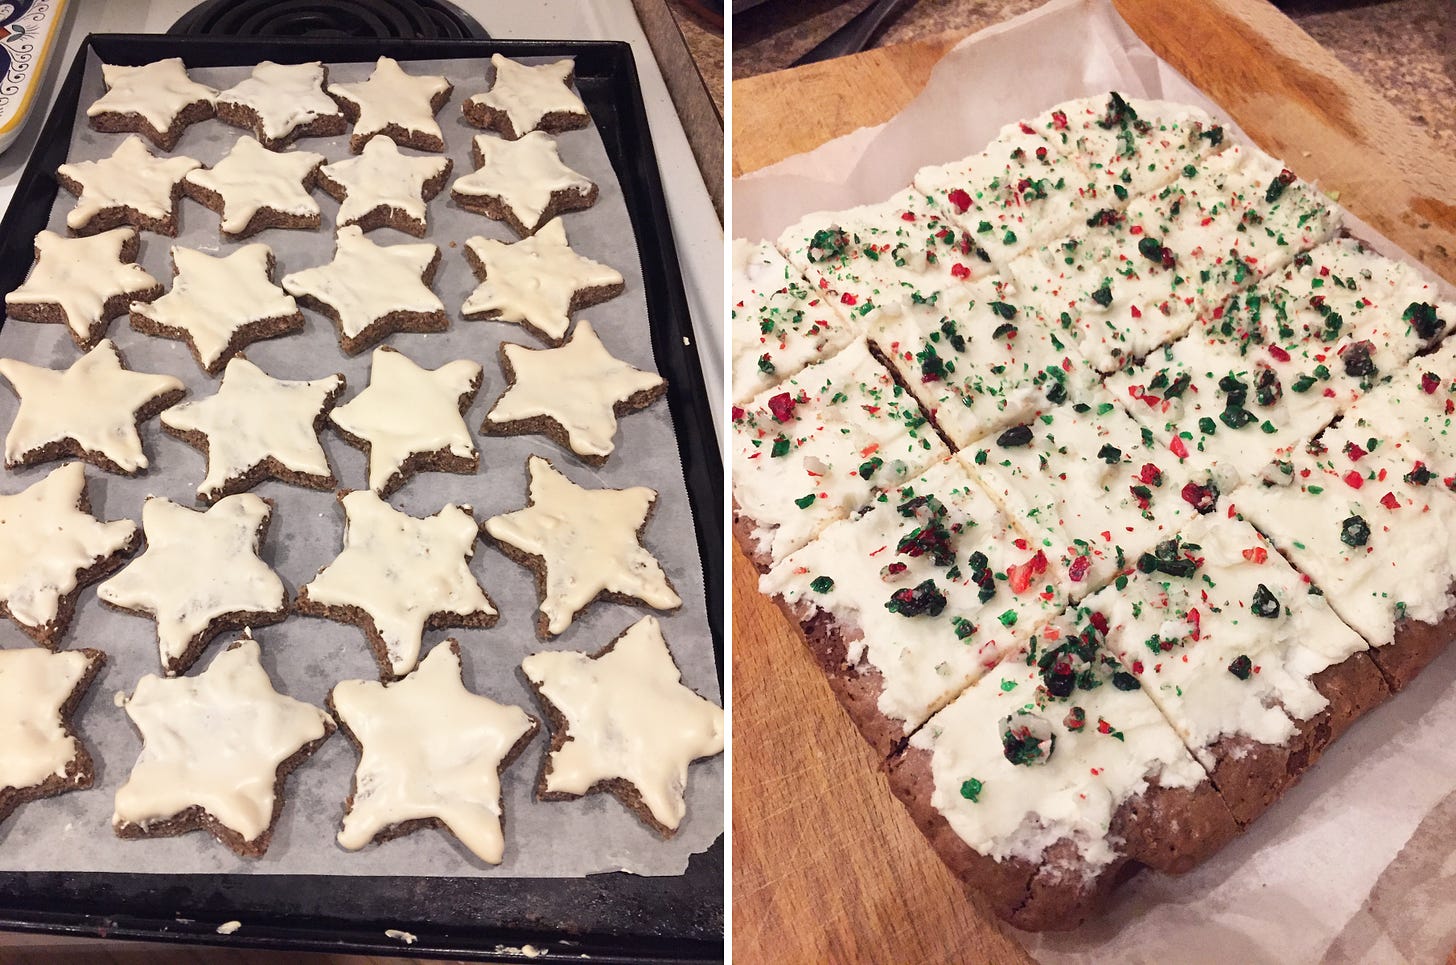 left image: a baking pan lined with parchment, covered in rows of zimtsterne with royal icing on top. right image: a wooden cutting board with brownies cut into squares on top of a piece of parchment. The brownies have white icing and green and red candy cane crumbles on top.